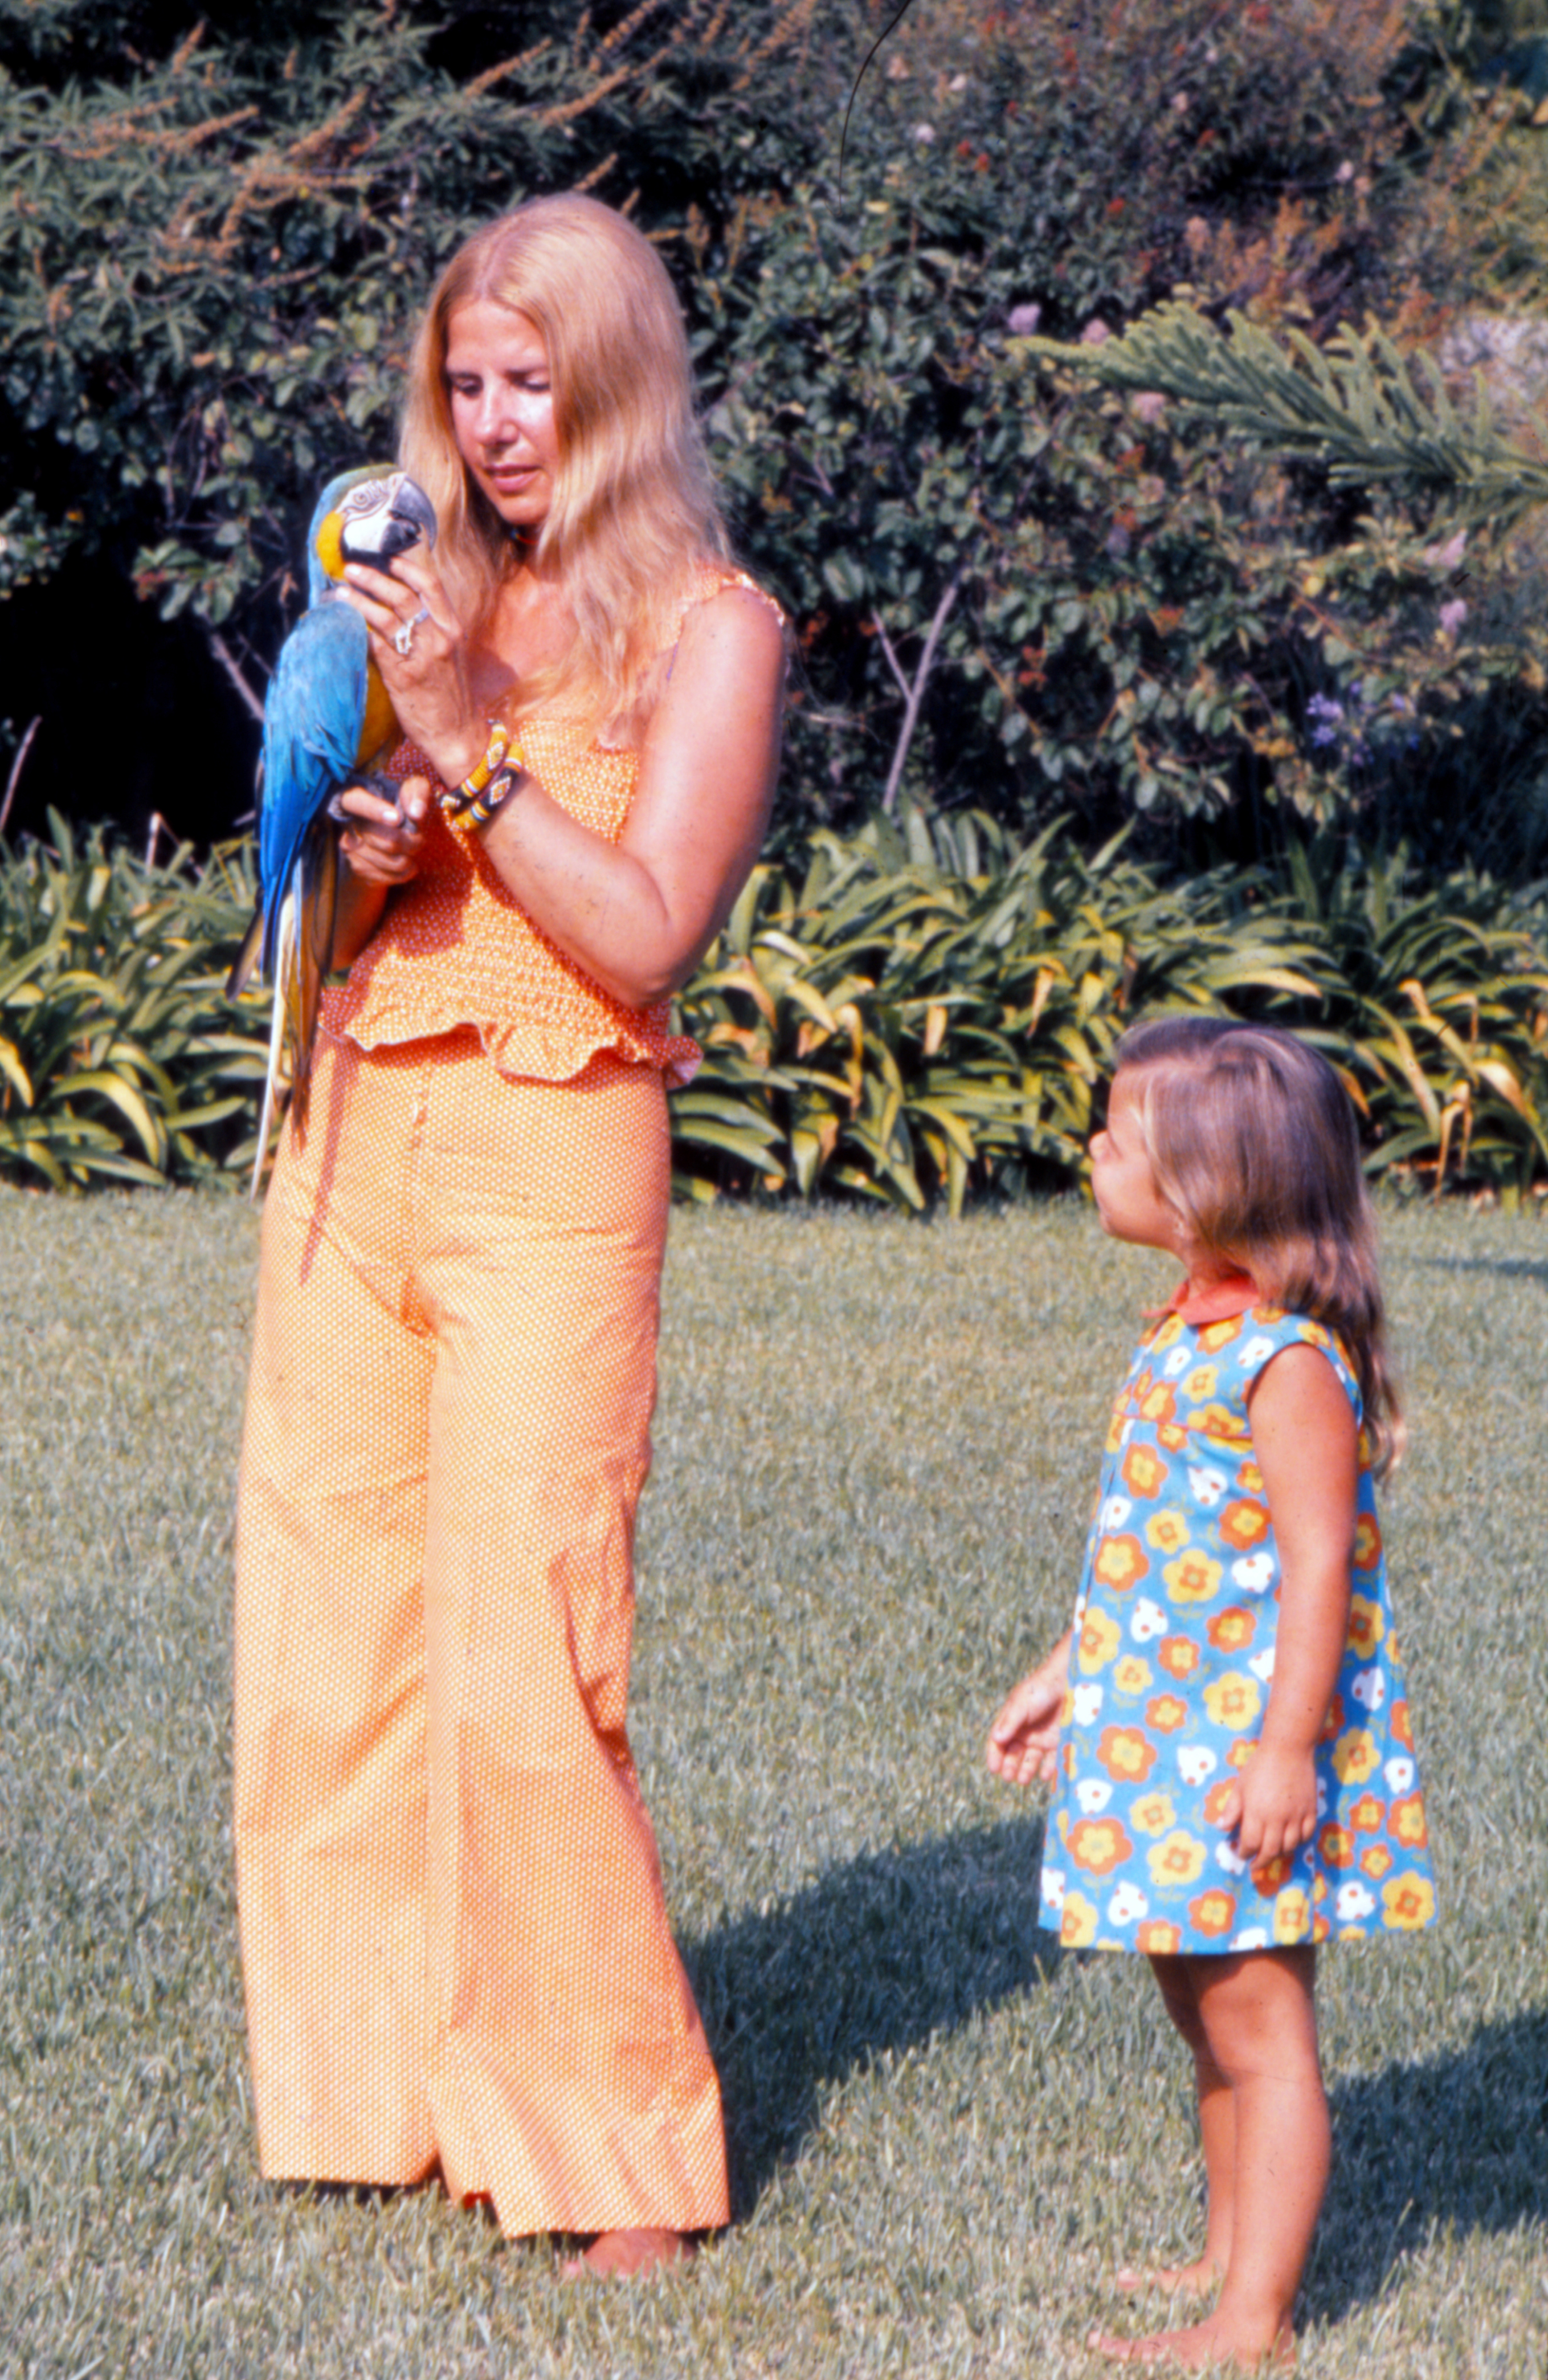 The Duchess of Alba, Maria del Rosario Cayetana Fitz-James Stuart with her daughter in Seville, Spain in 1973. | Source: Getty Images